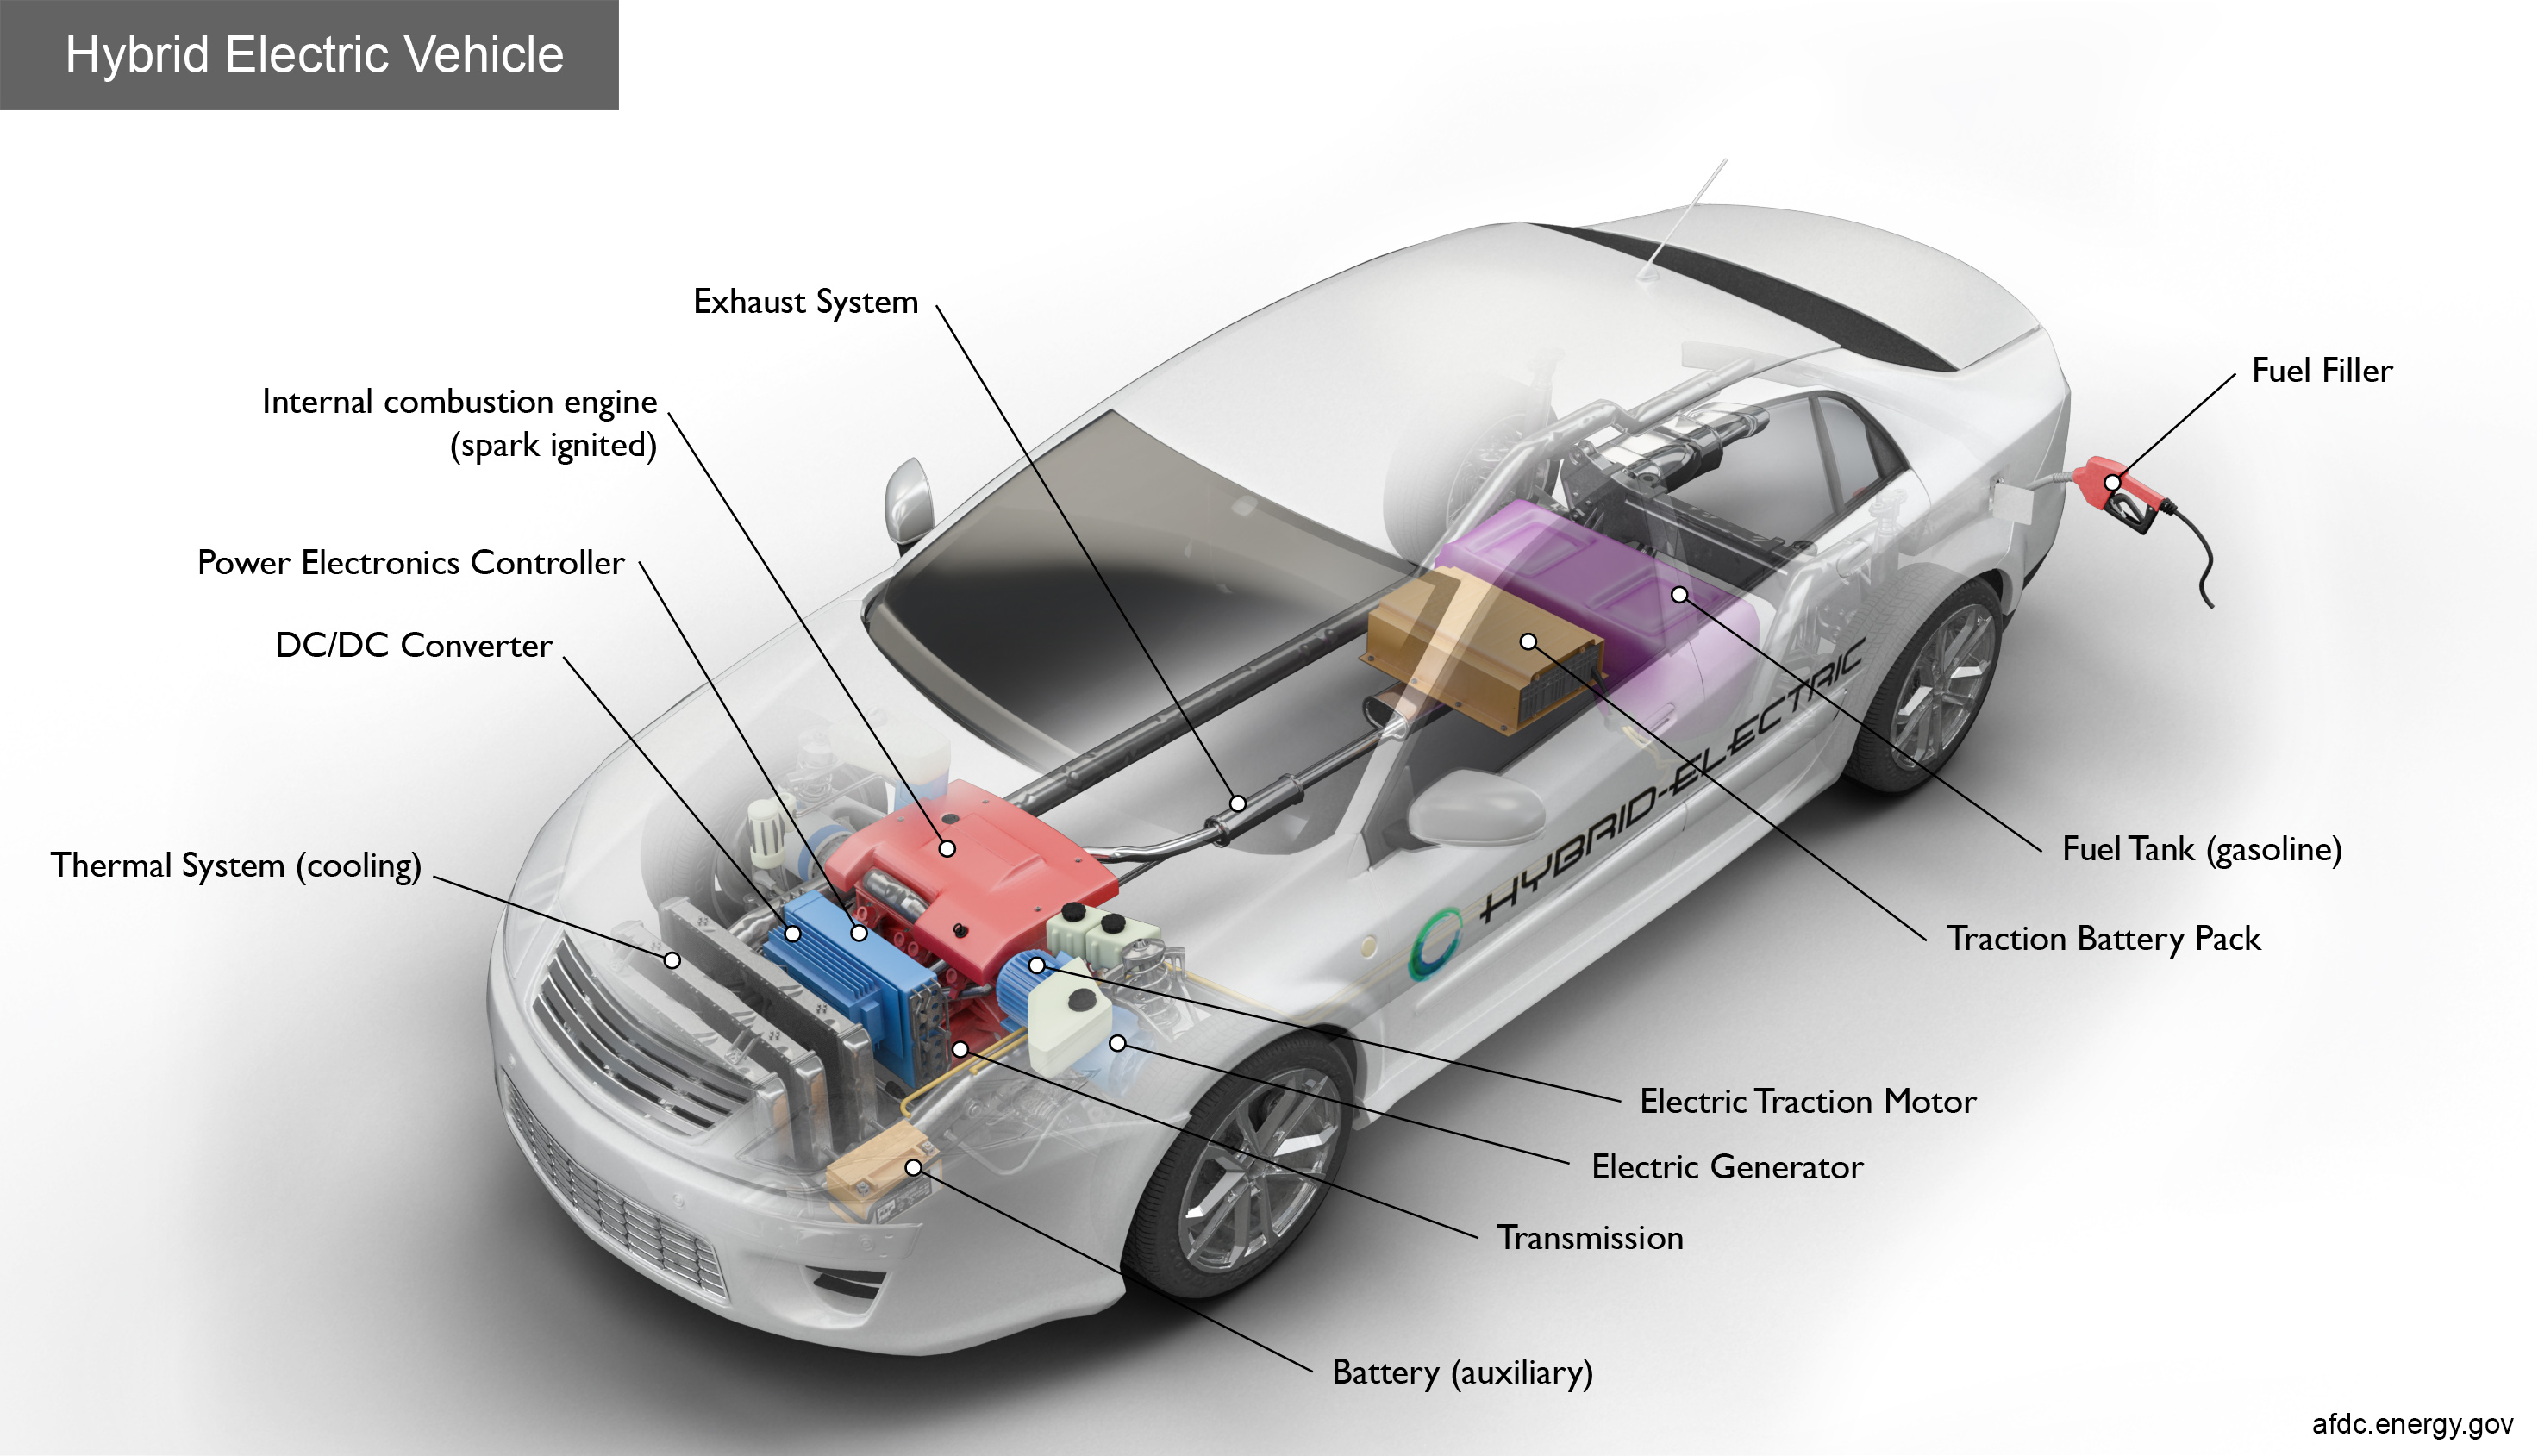 when does a hybrid vehicle switch from gas to electric?